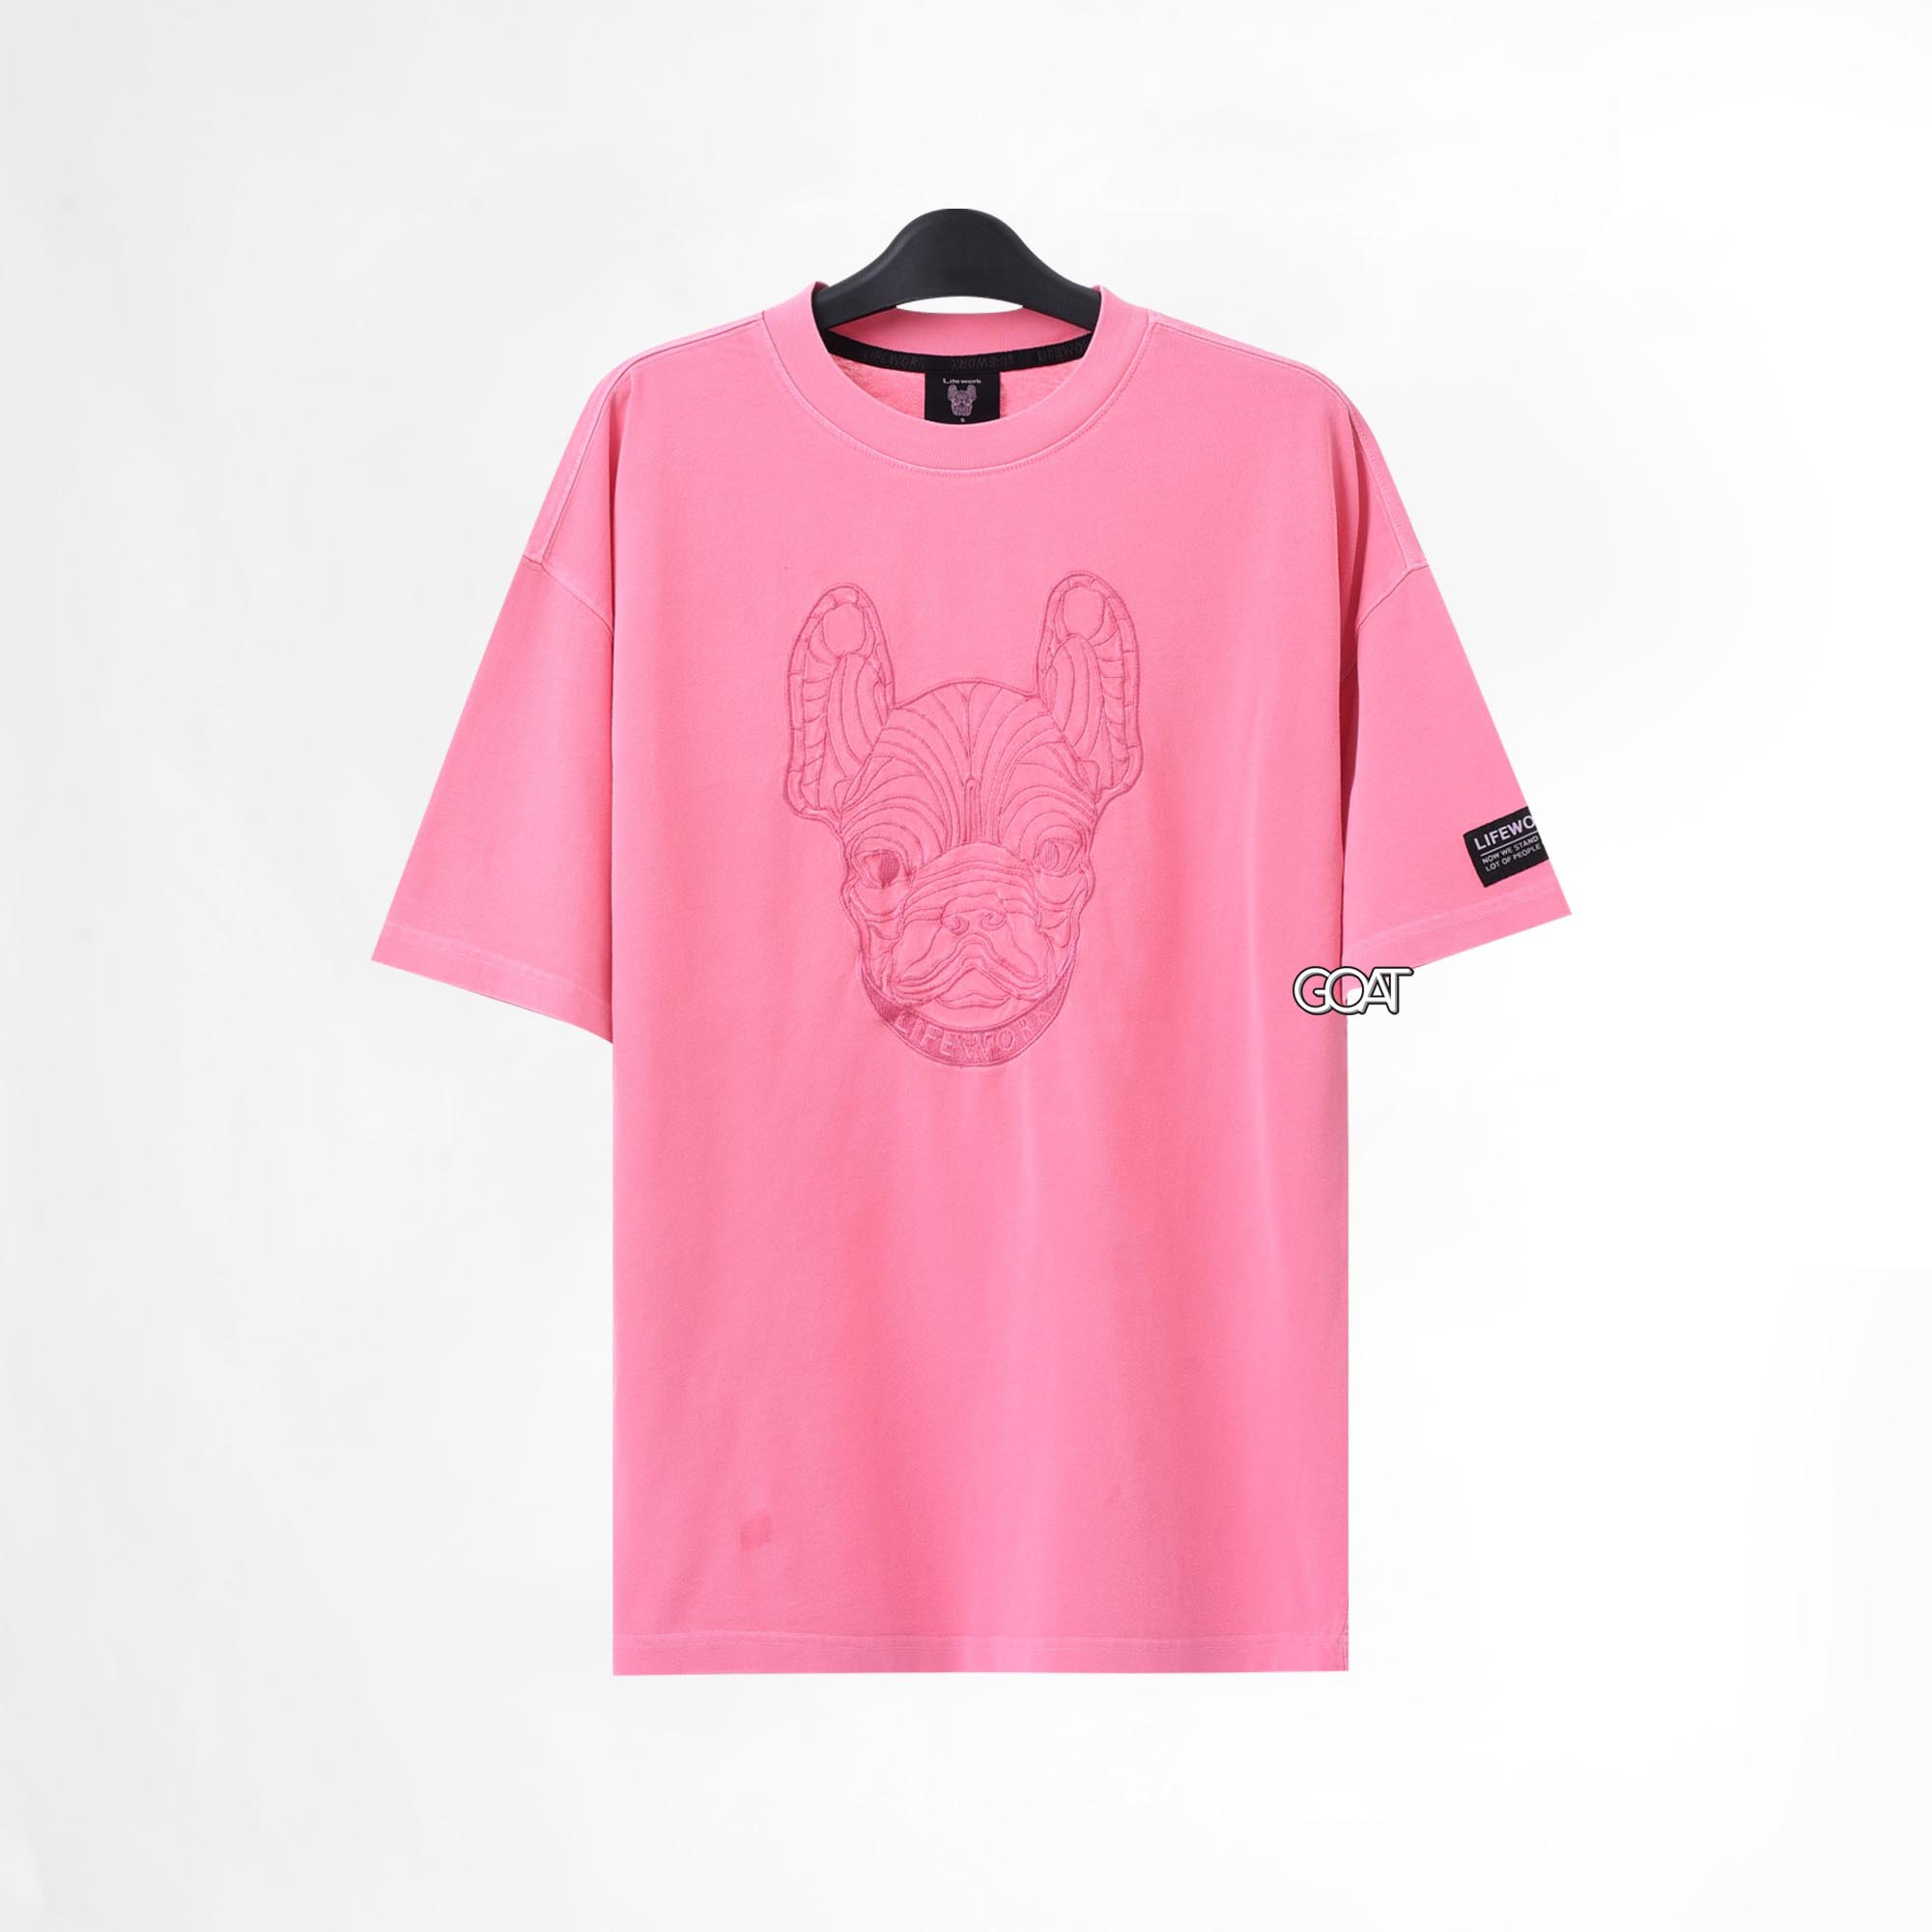 LIFEWORK PIGMENTED EMBROIDERED T-SHIRT - PINK